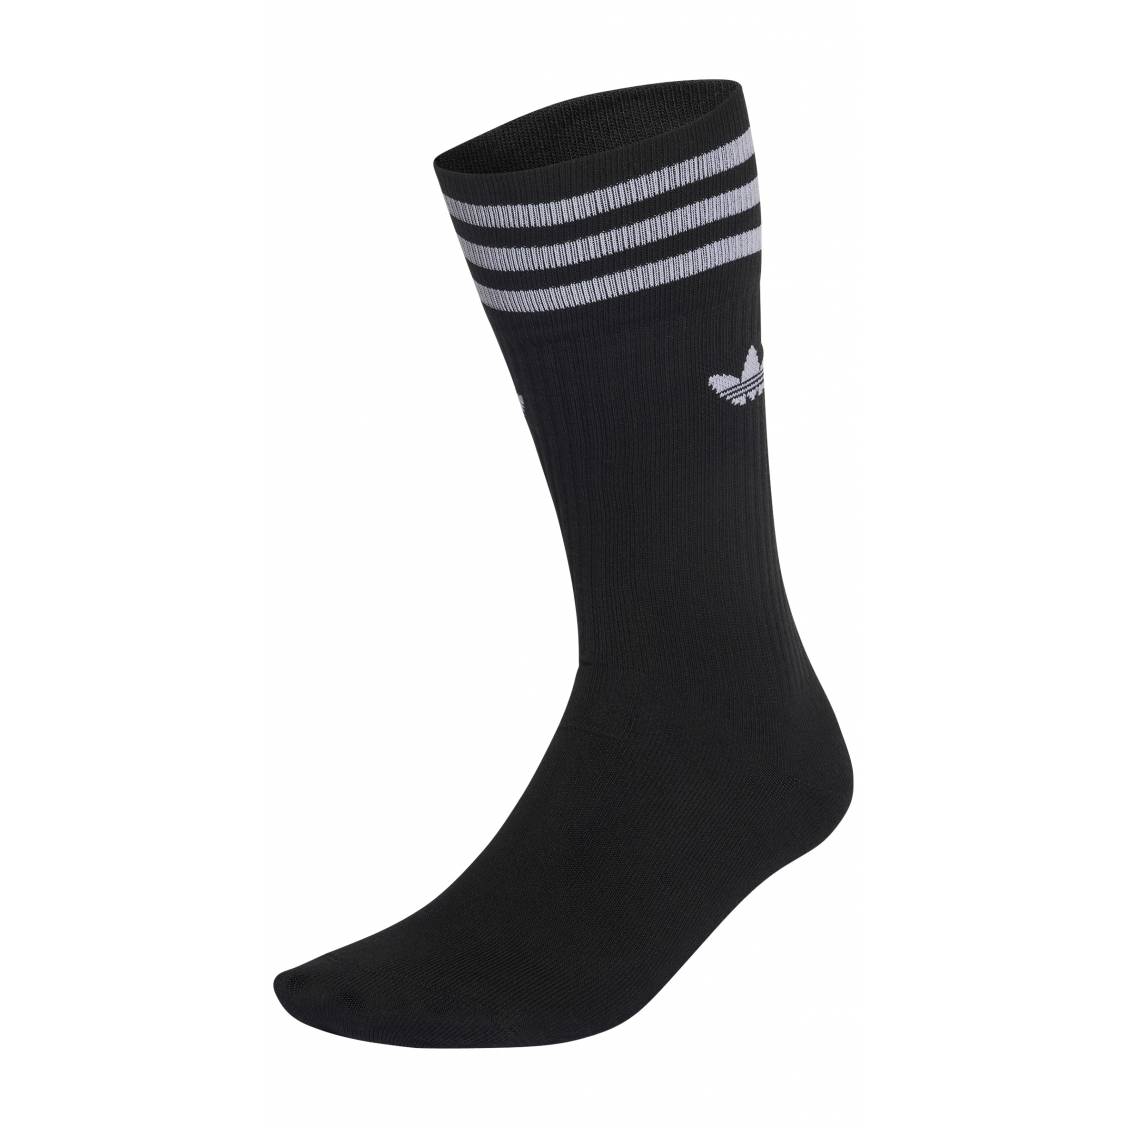 Chaussettes Homme  Adidas Chaussettes adidas 3 Pairs Gris / Gris